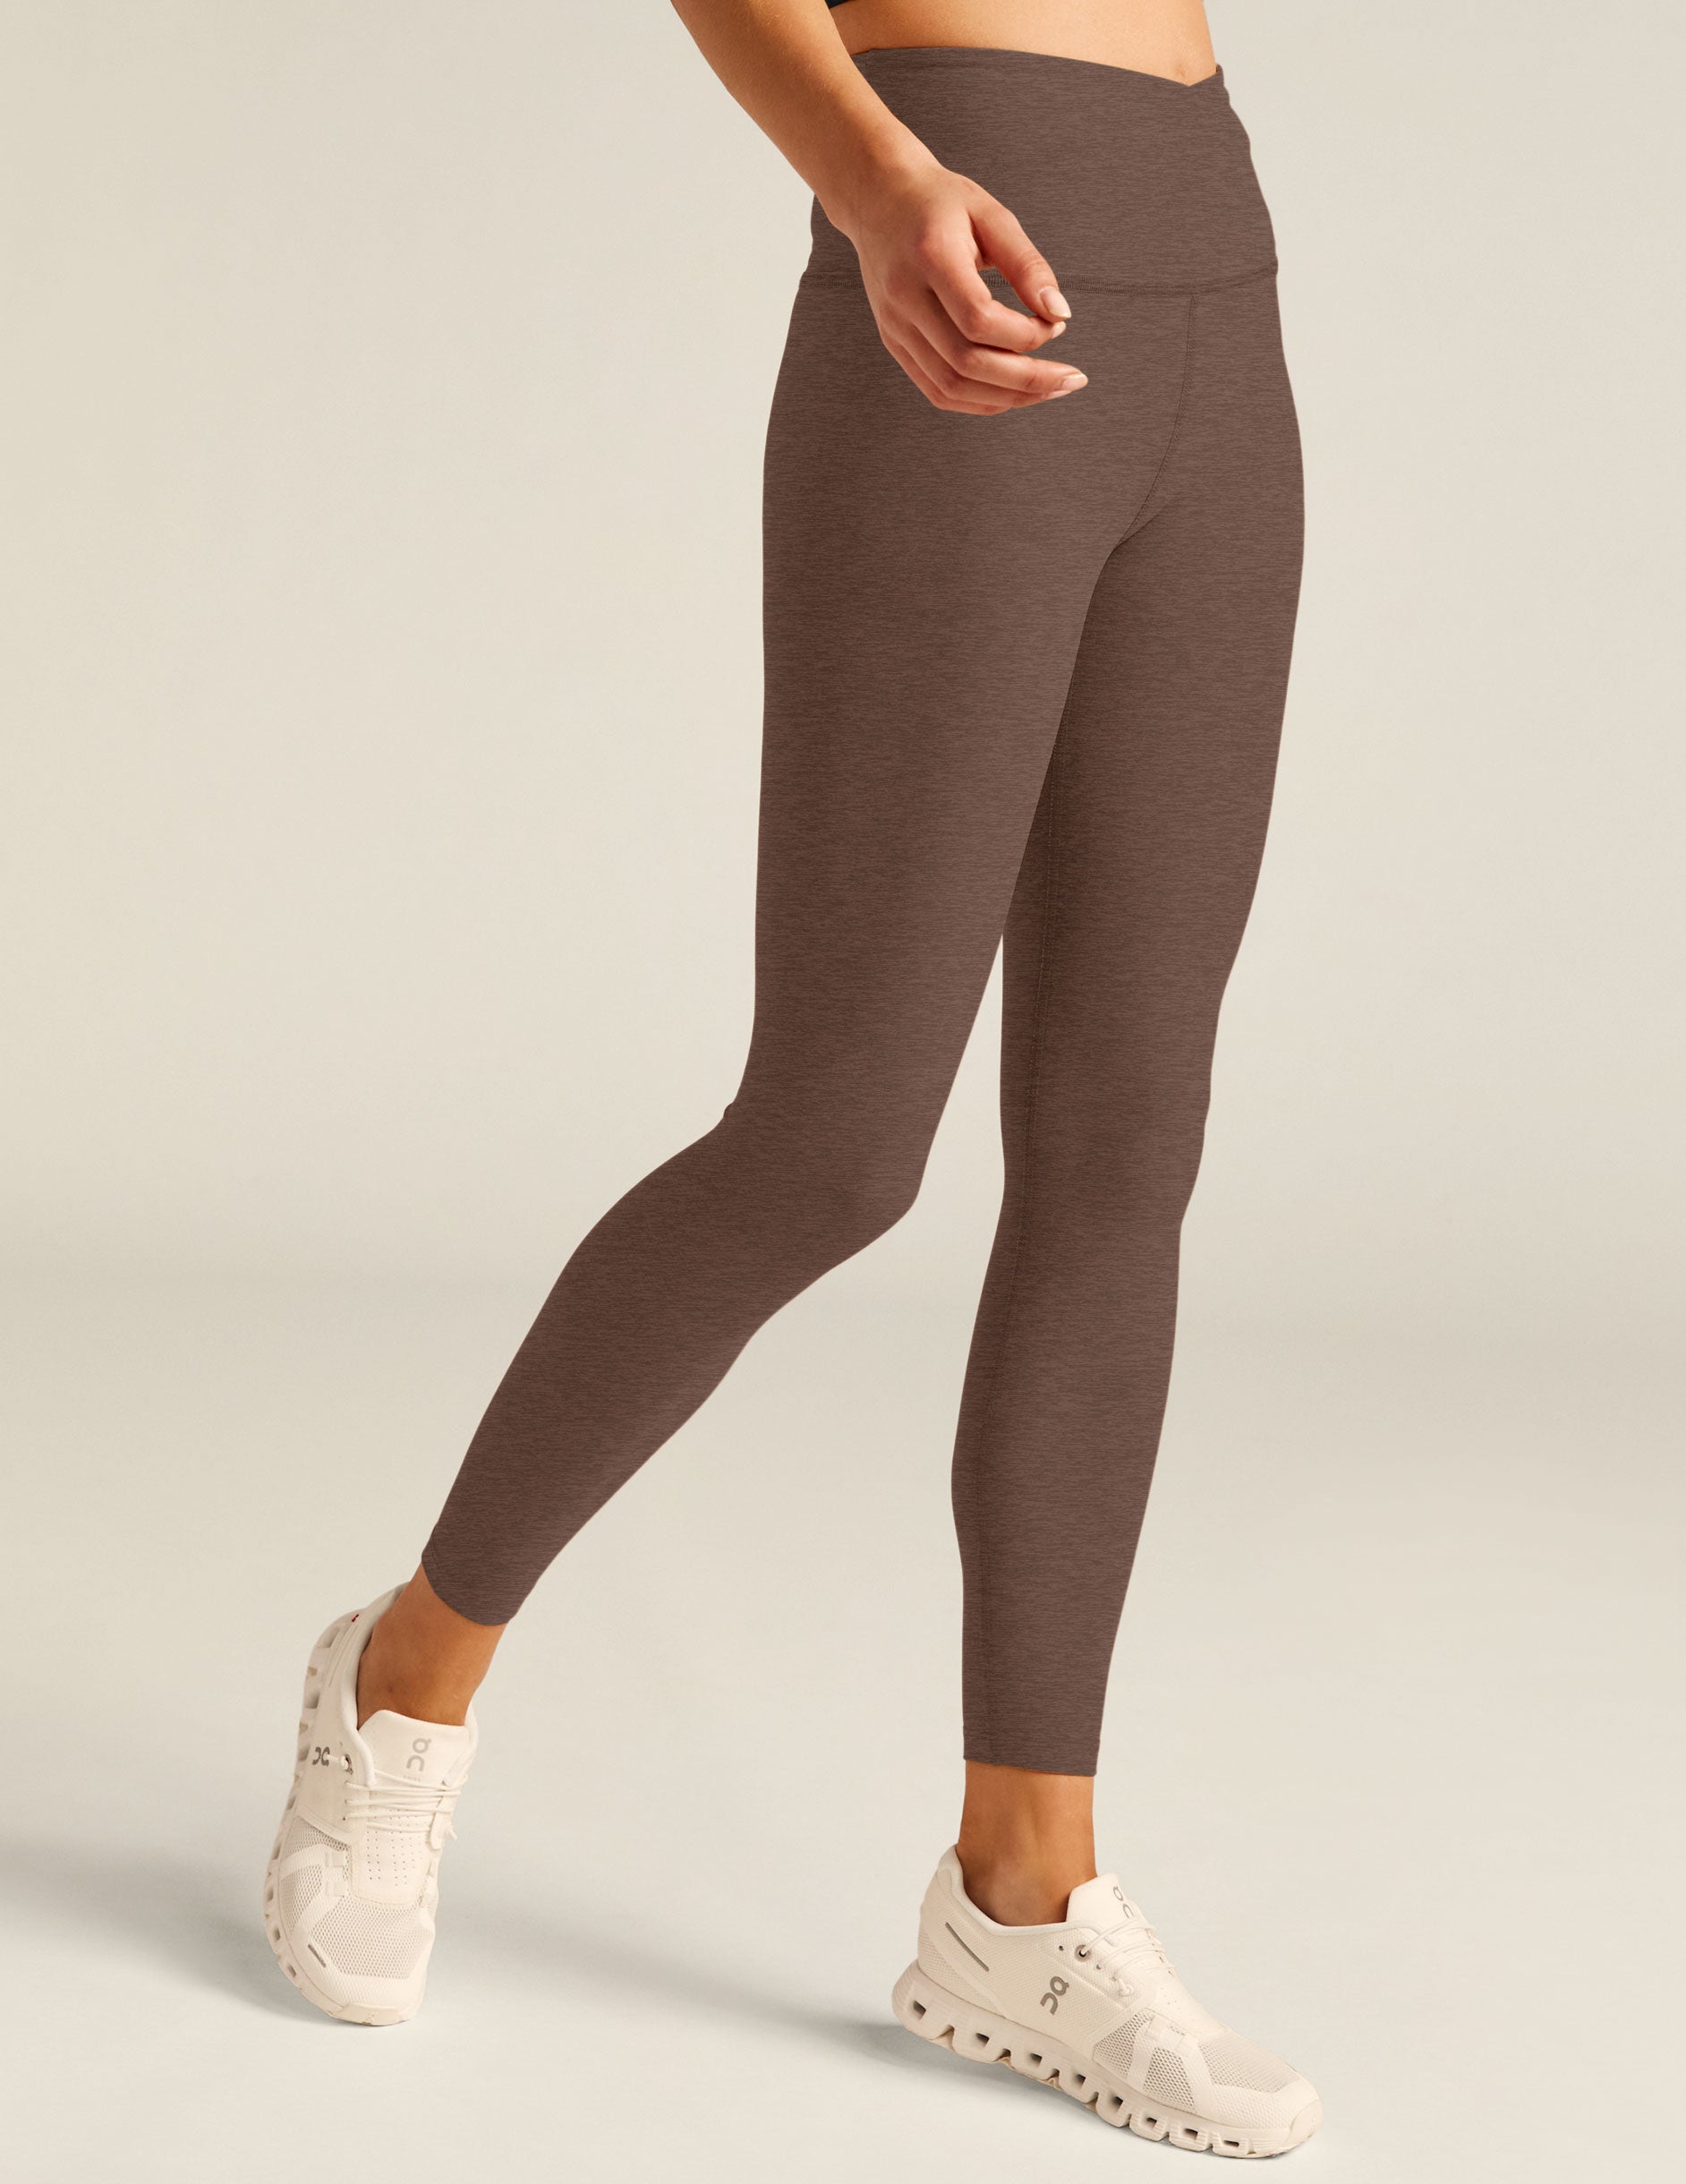 brown high-waisted midi leggings with a front crossover design on the waistband. 